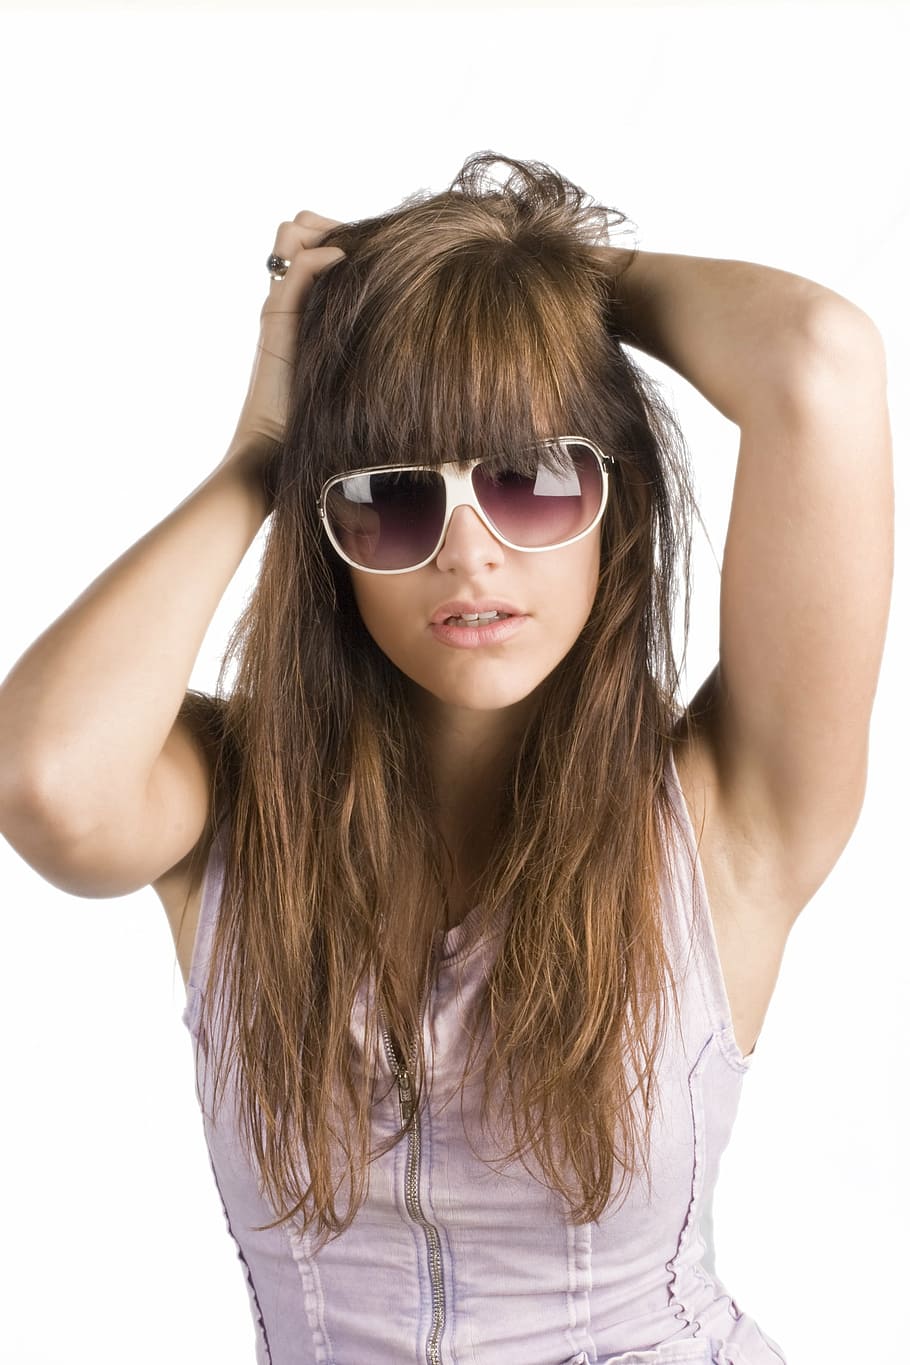 woman in pink tank top wearing white frame sunglasses, model